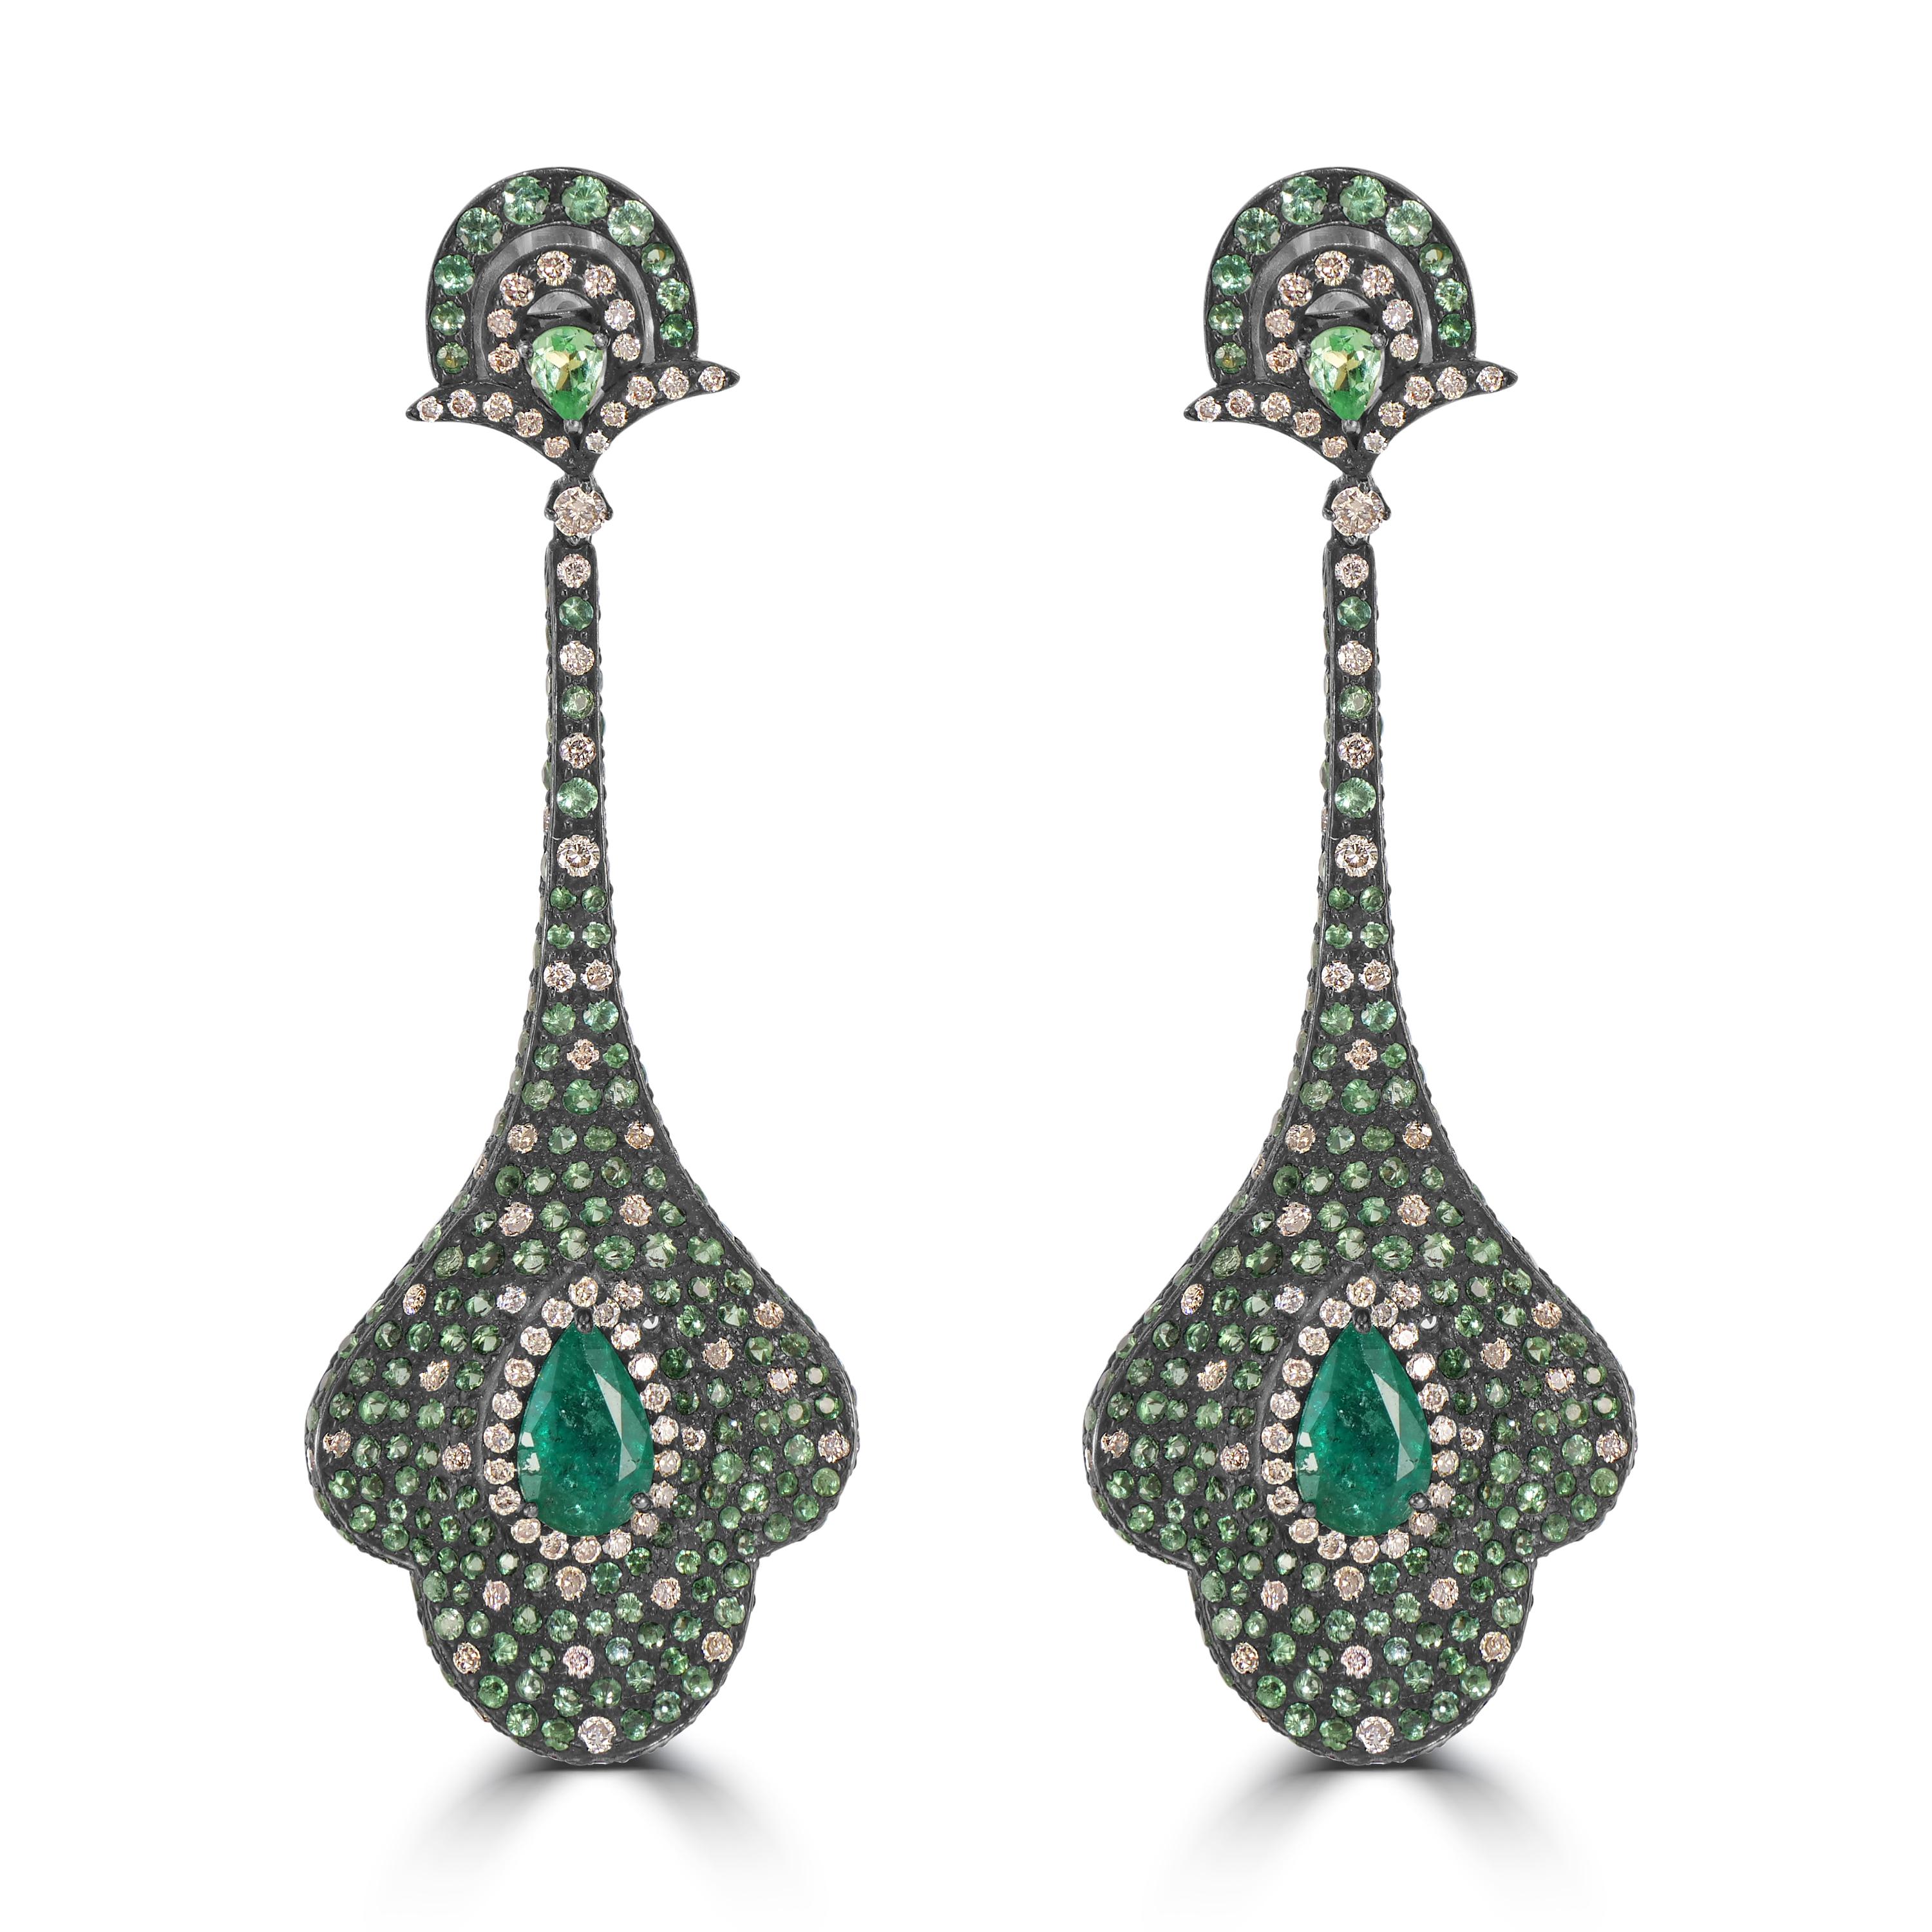 Introducing the Victorian 8.7 Cttw. Emerald, Tsavorite, and Diamond Dangle Earrings—a masterpiece that seamlessly blends opulence, nature-inspired design, and exquisite craftsmanship.

The focal point of these earrings is the goglet drop, a unique